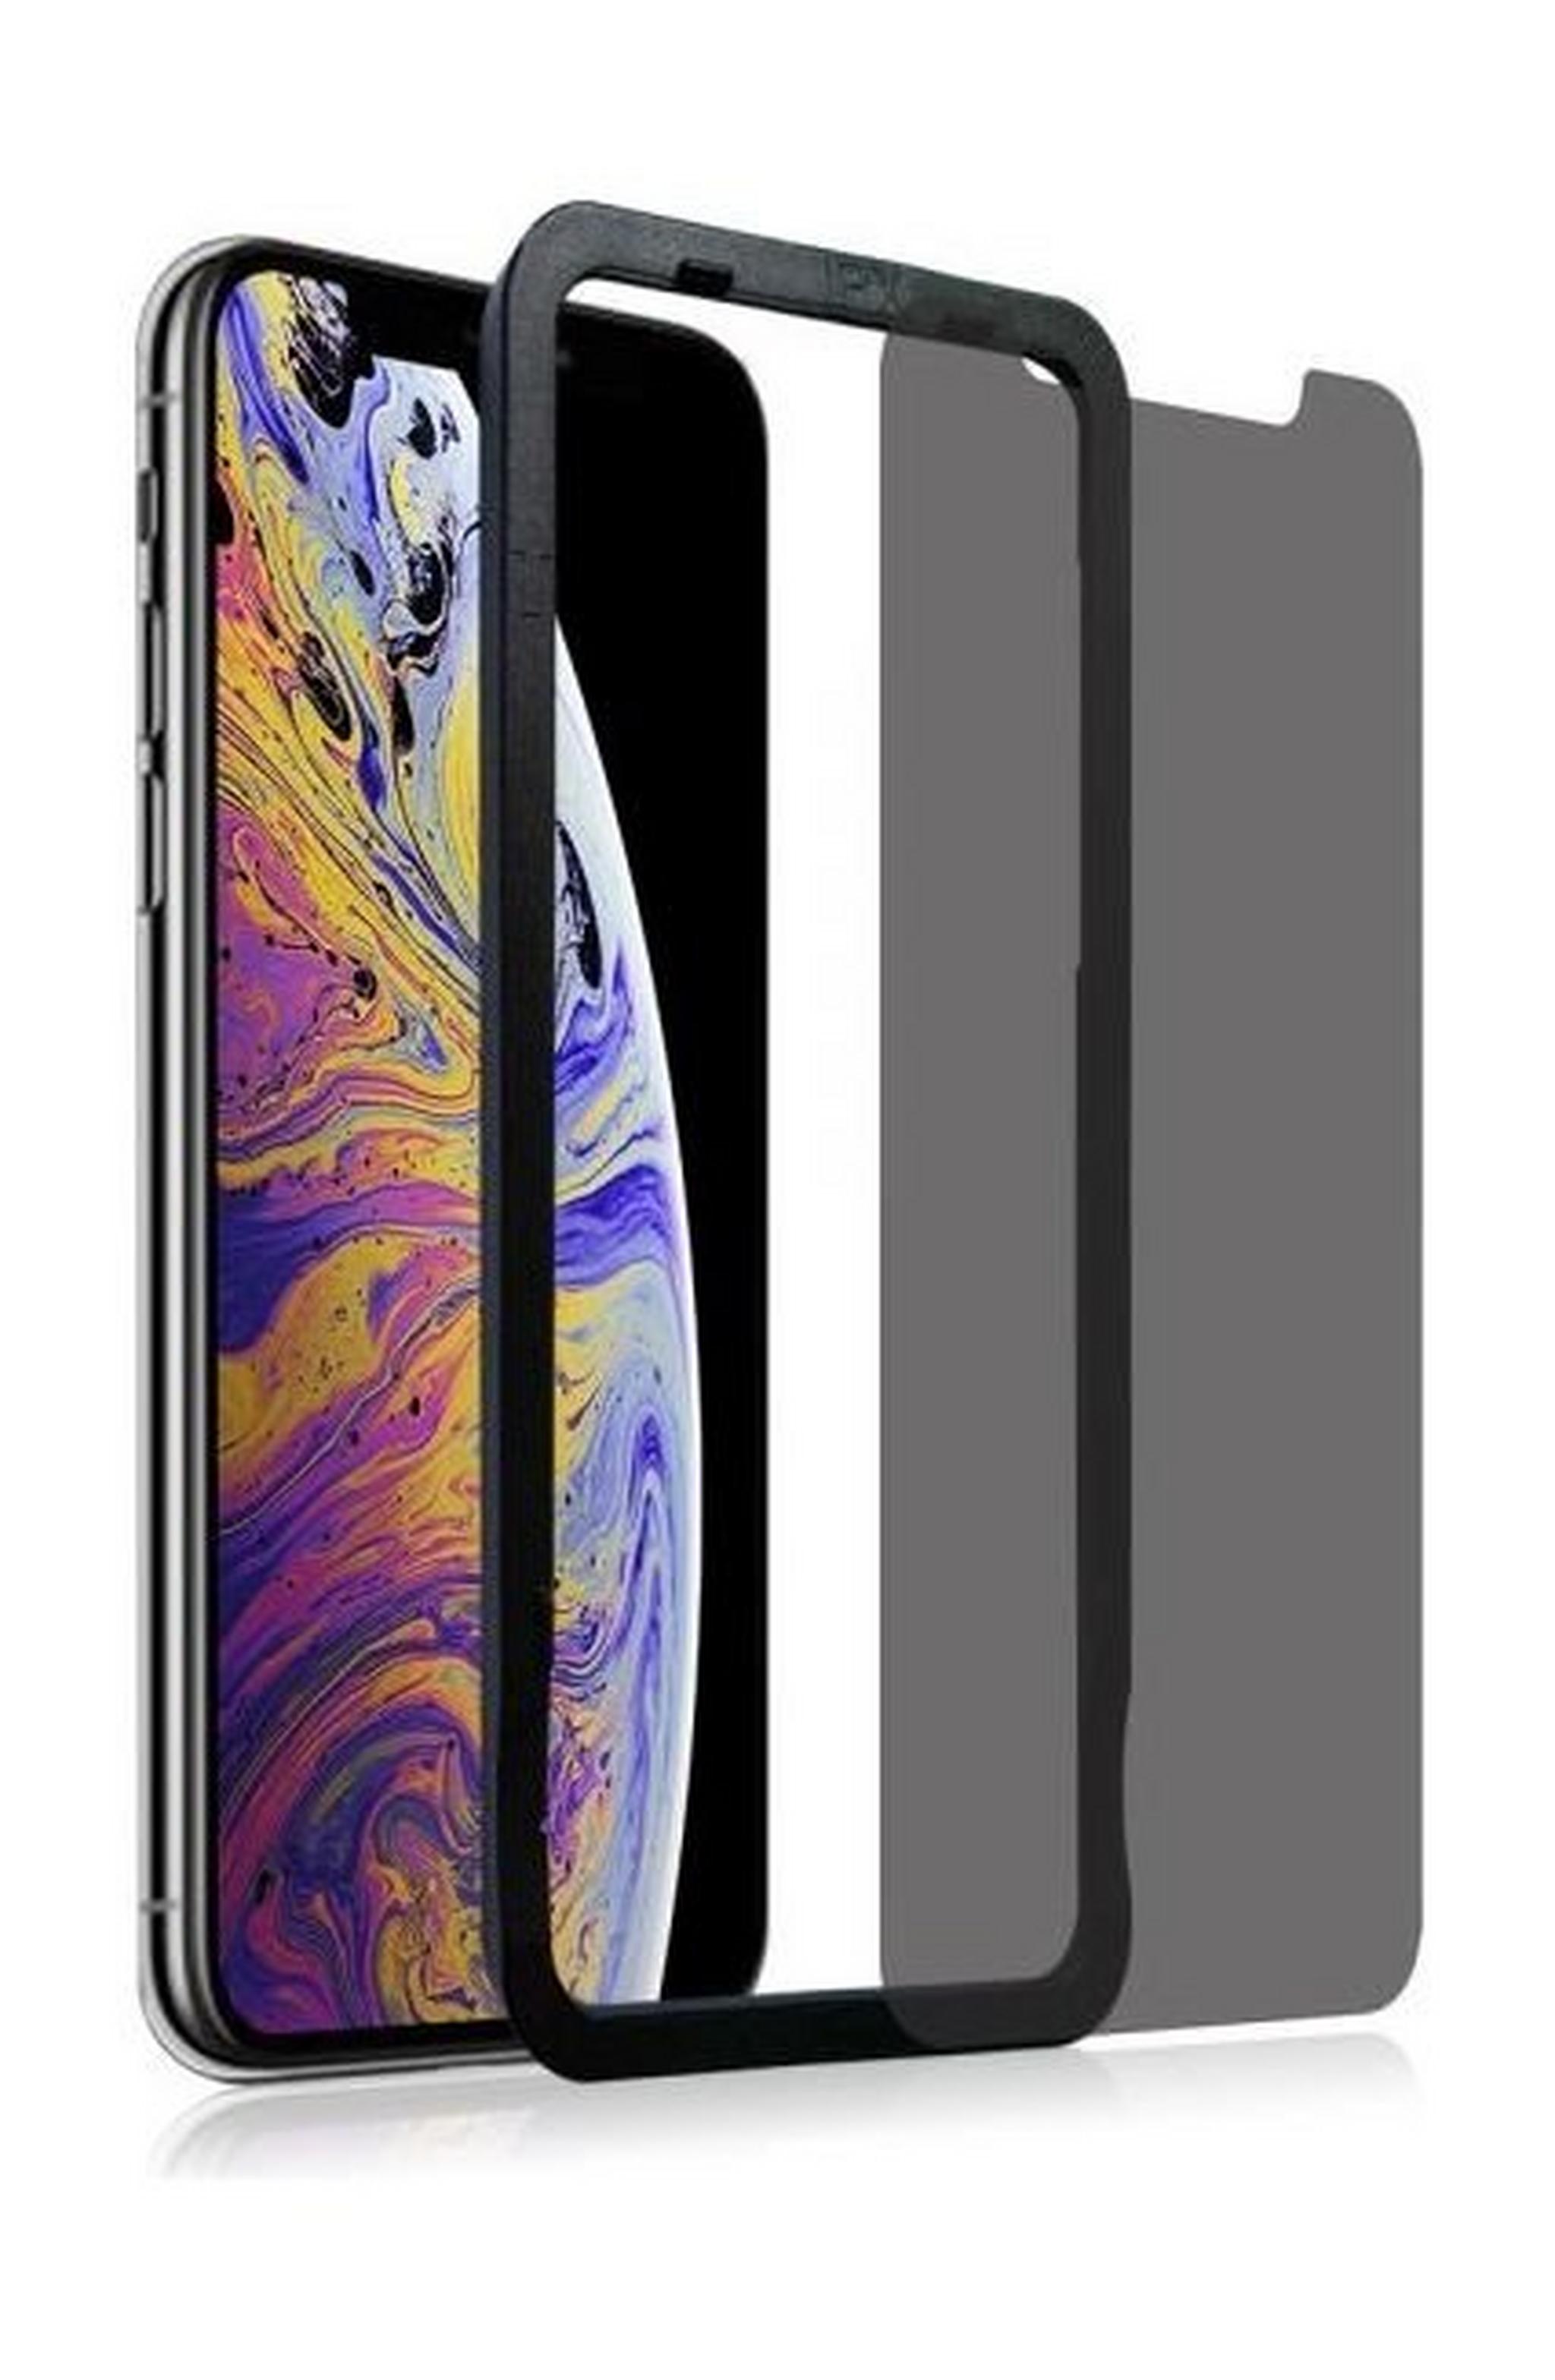 Baykron Privacy screen protector for iPhone XS